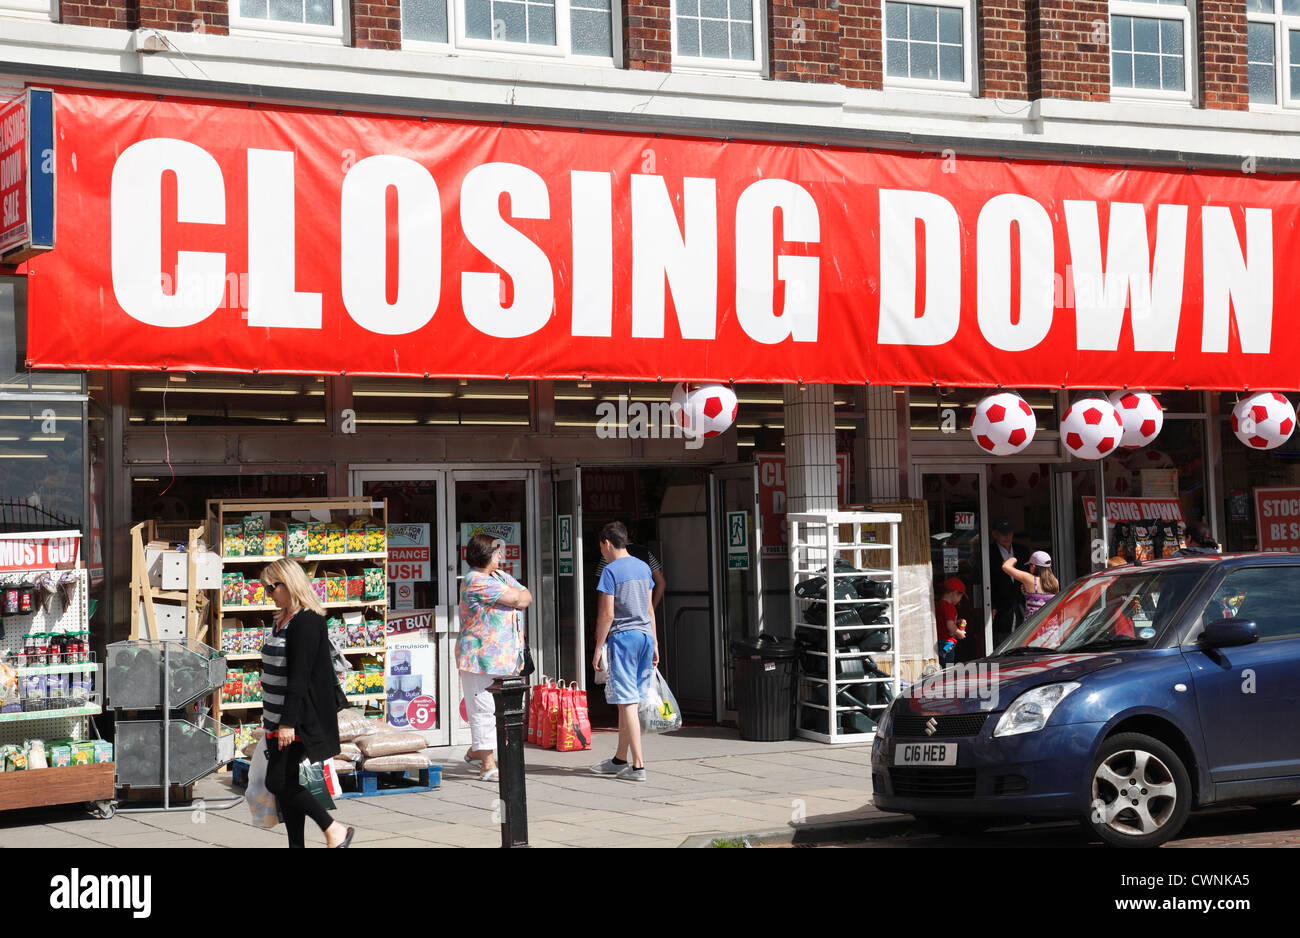 A shop closing down on a high street in the U.K. Stock Photo